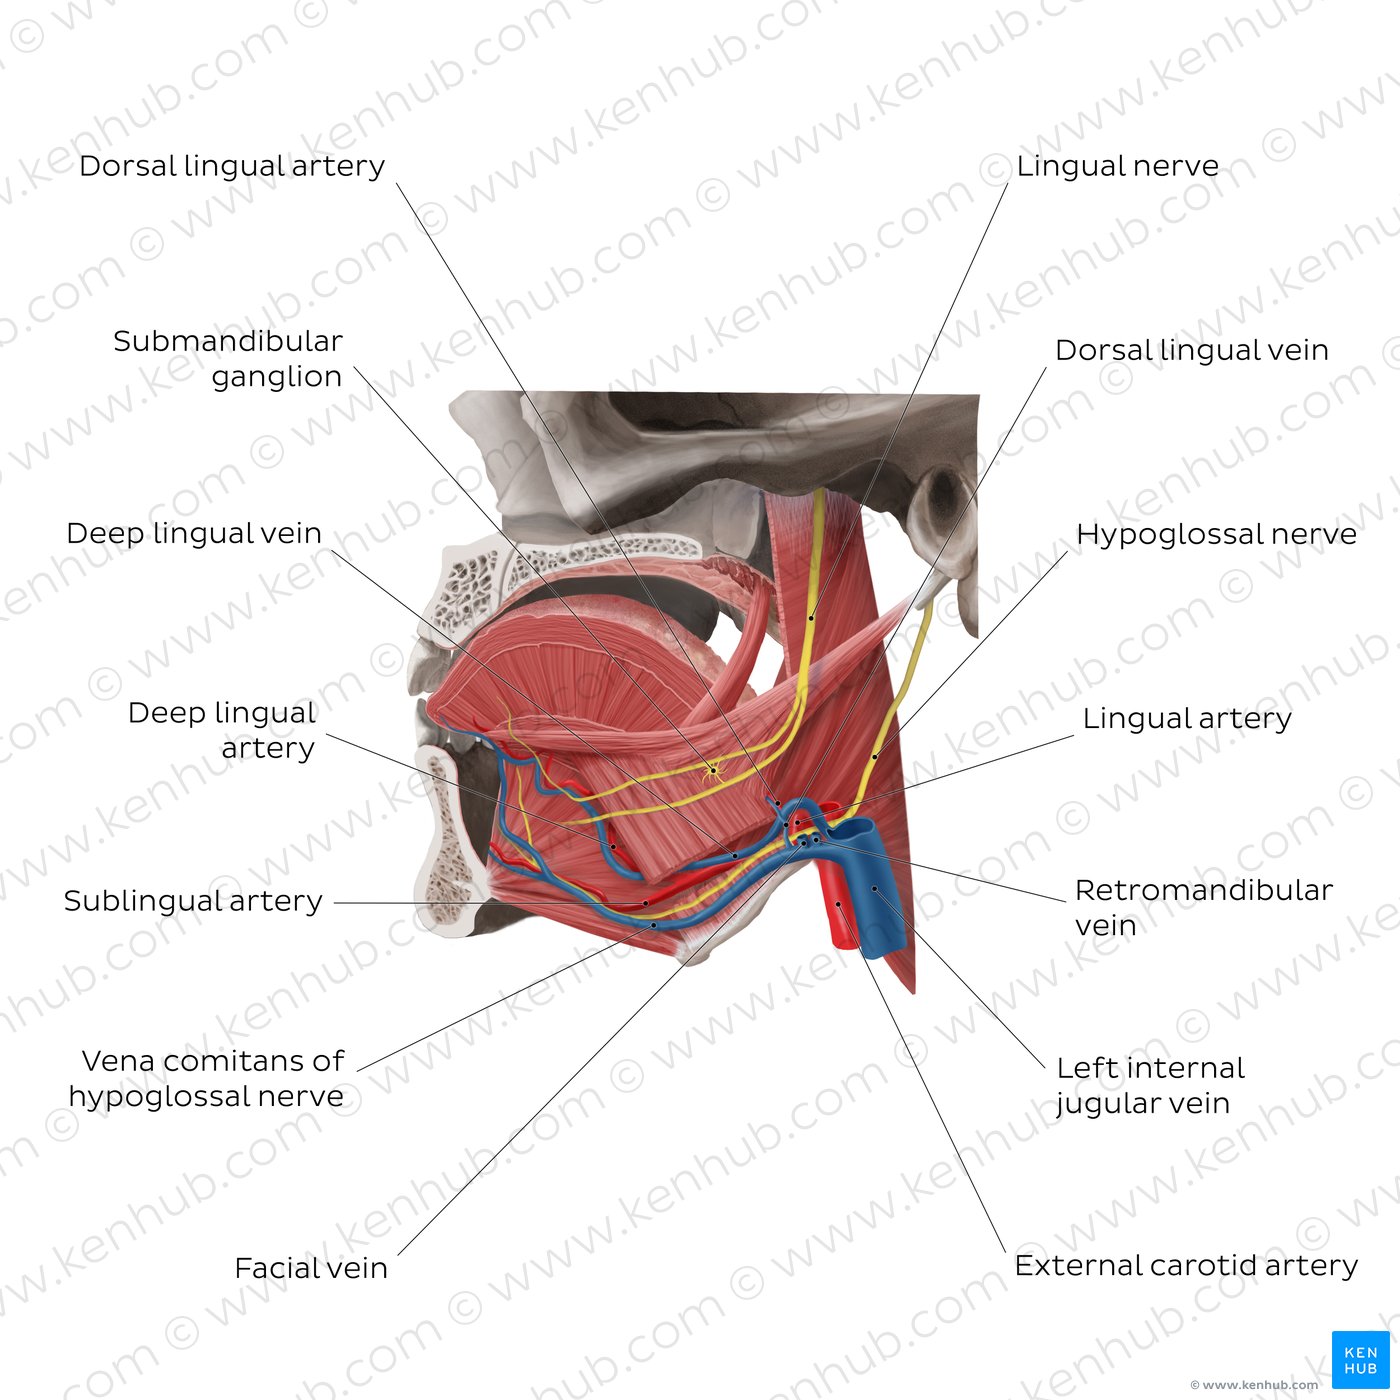 Neurovasculature of the tongue (lateral-left view)